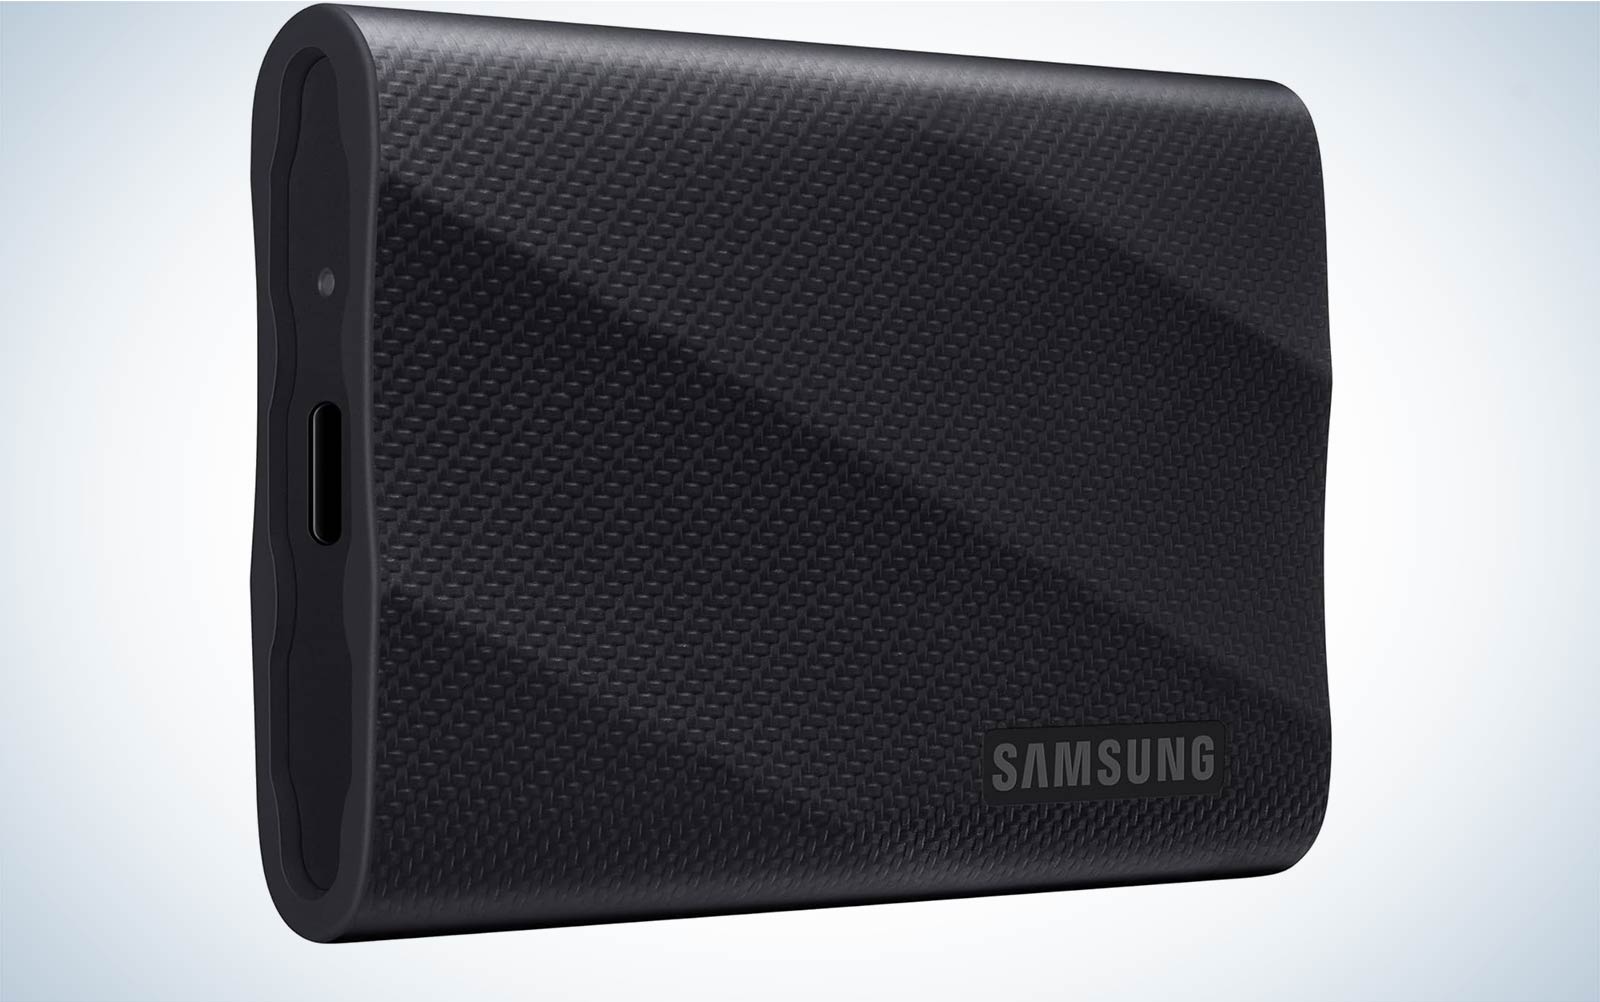 Samsung Portable SSD T9 4TB review: A fast, rugged and expensive portable  drive 